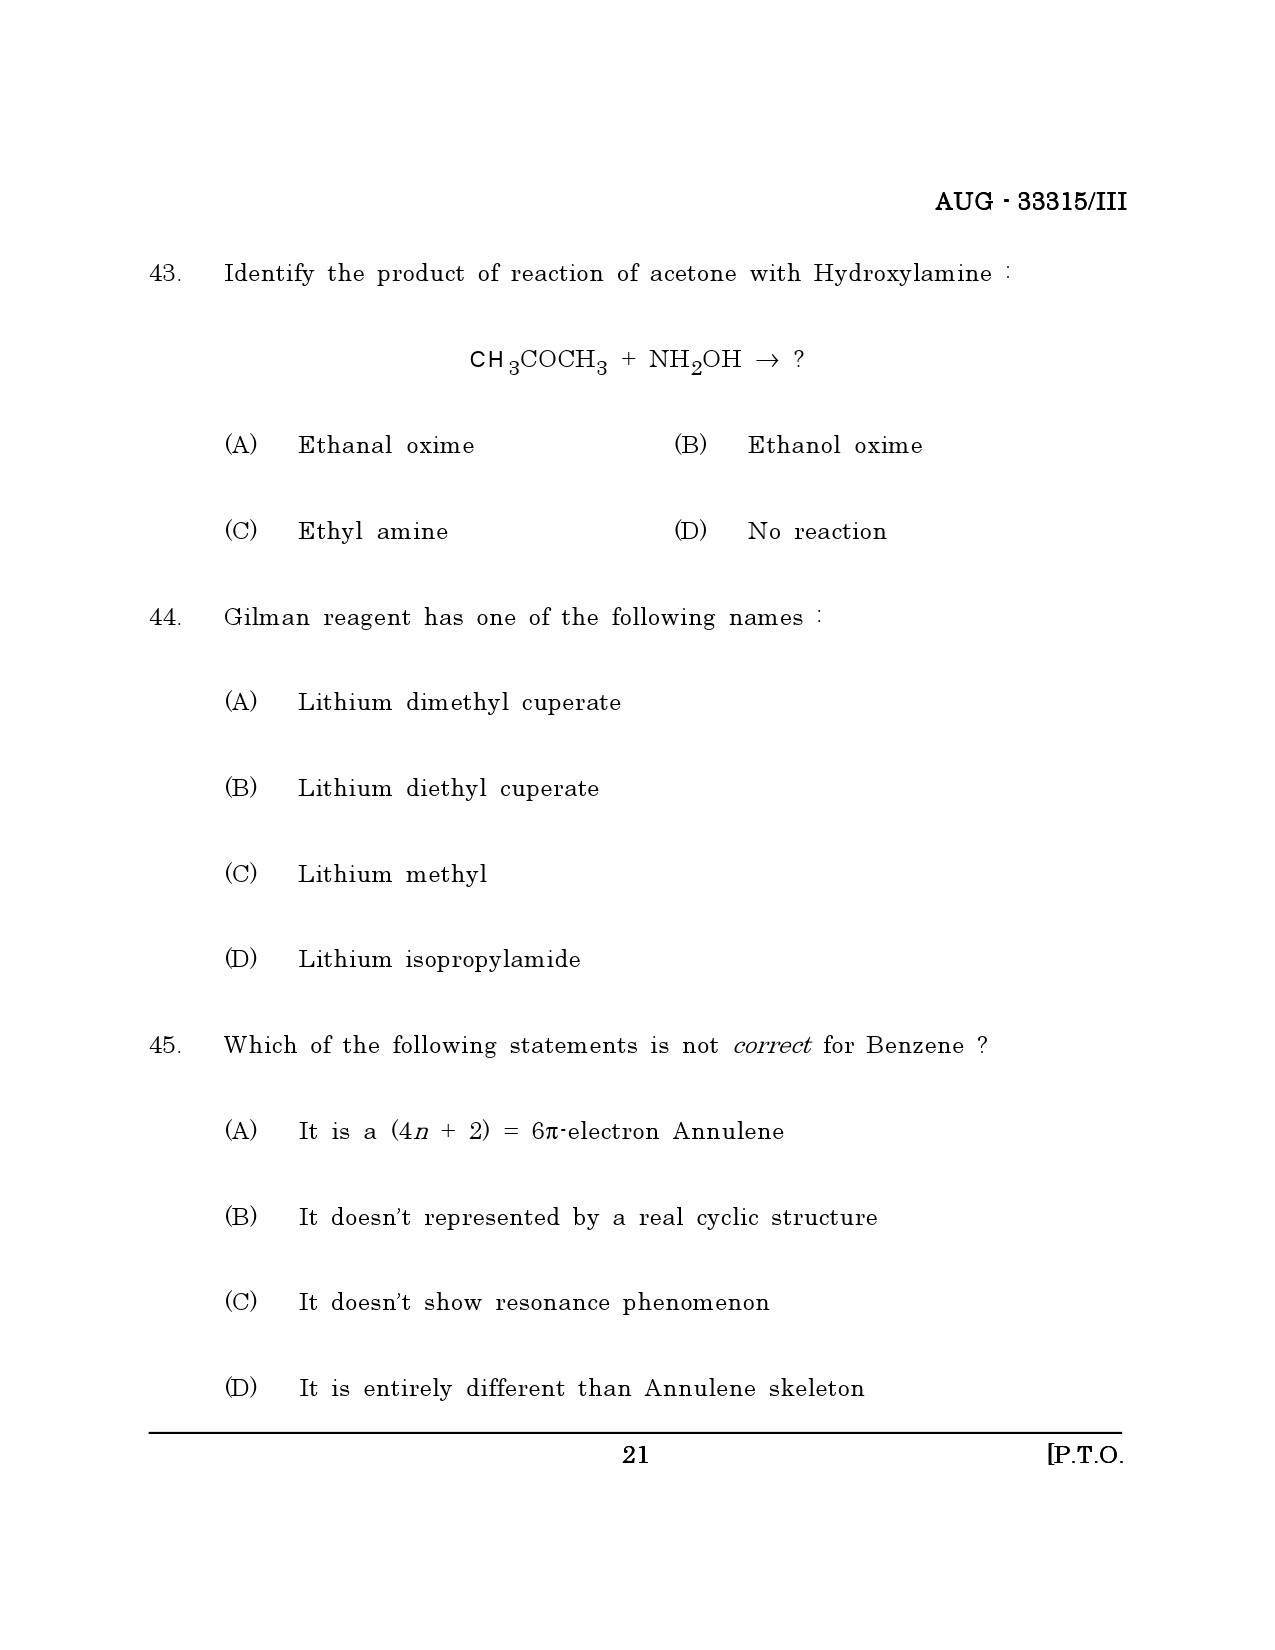 Maharashtra SET Chemical Sciences Question Paper III August 2015 20